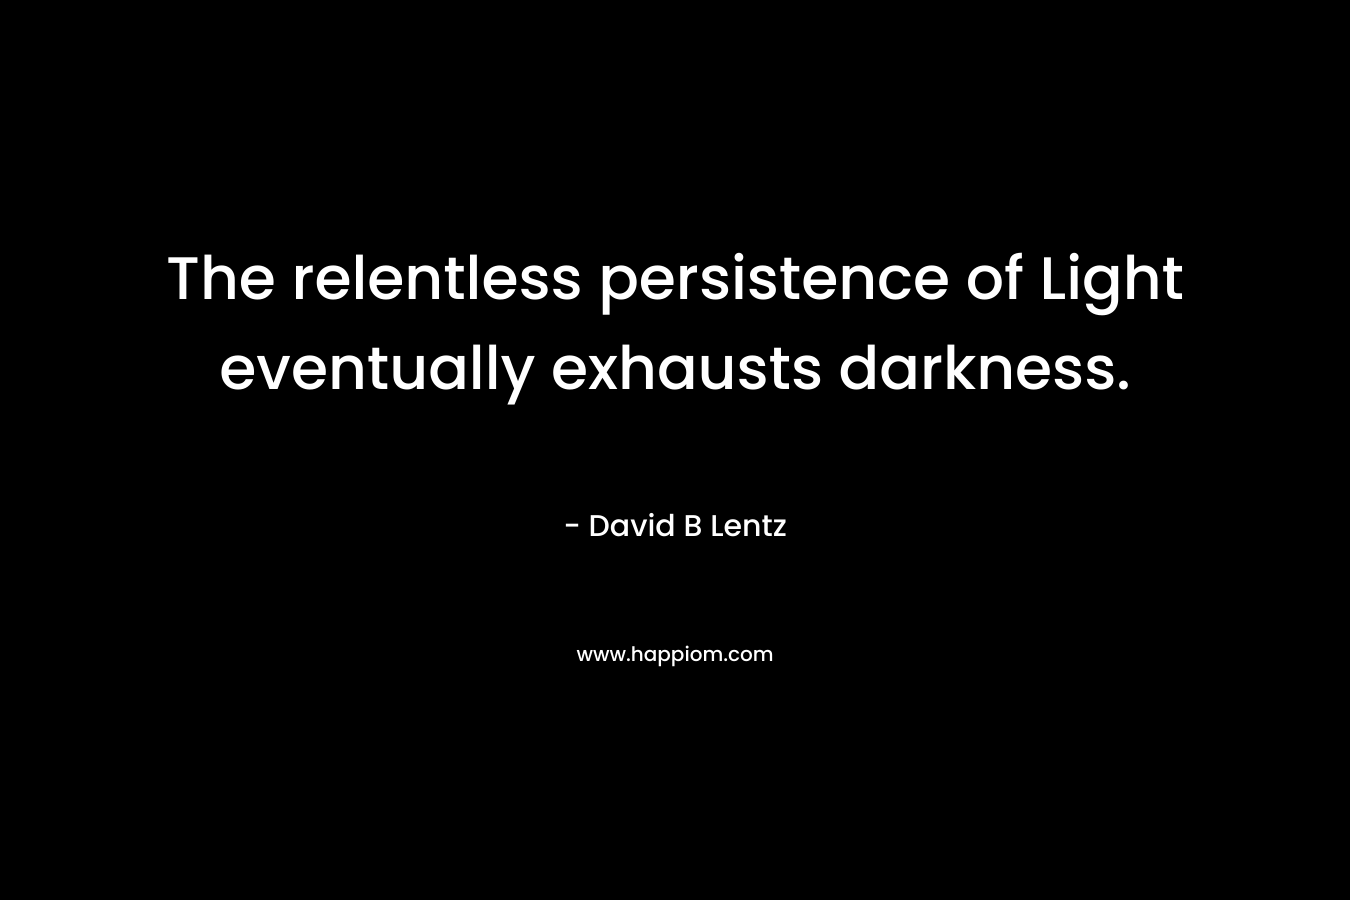 The relentless persistence of Light eventually exhausts darkness.